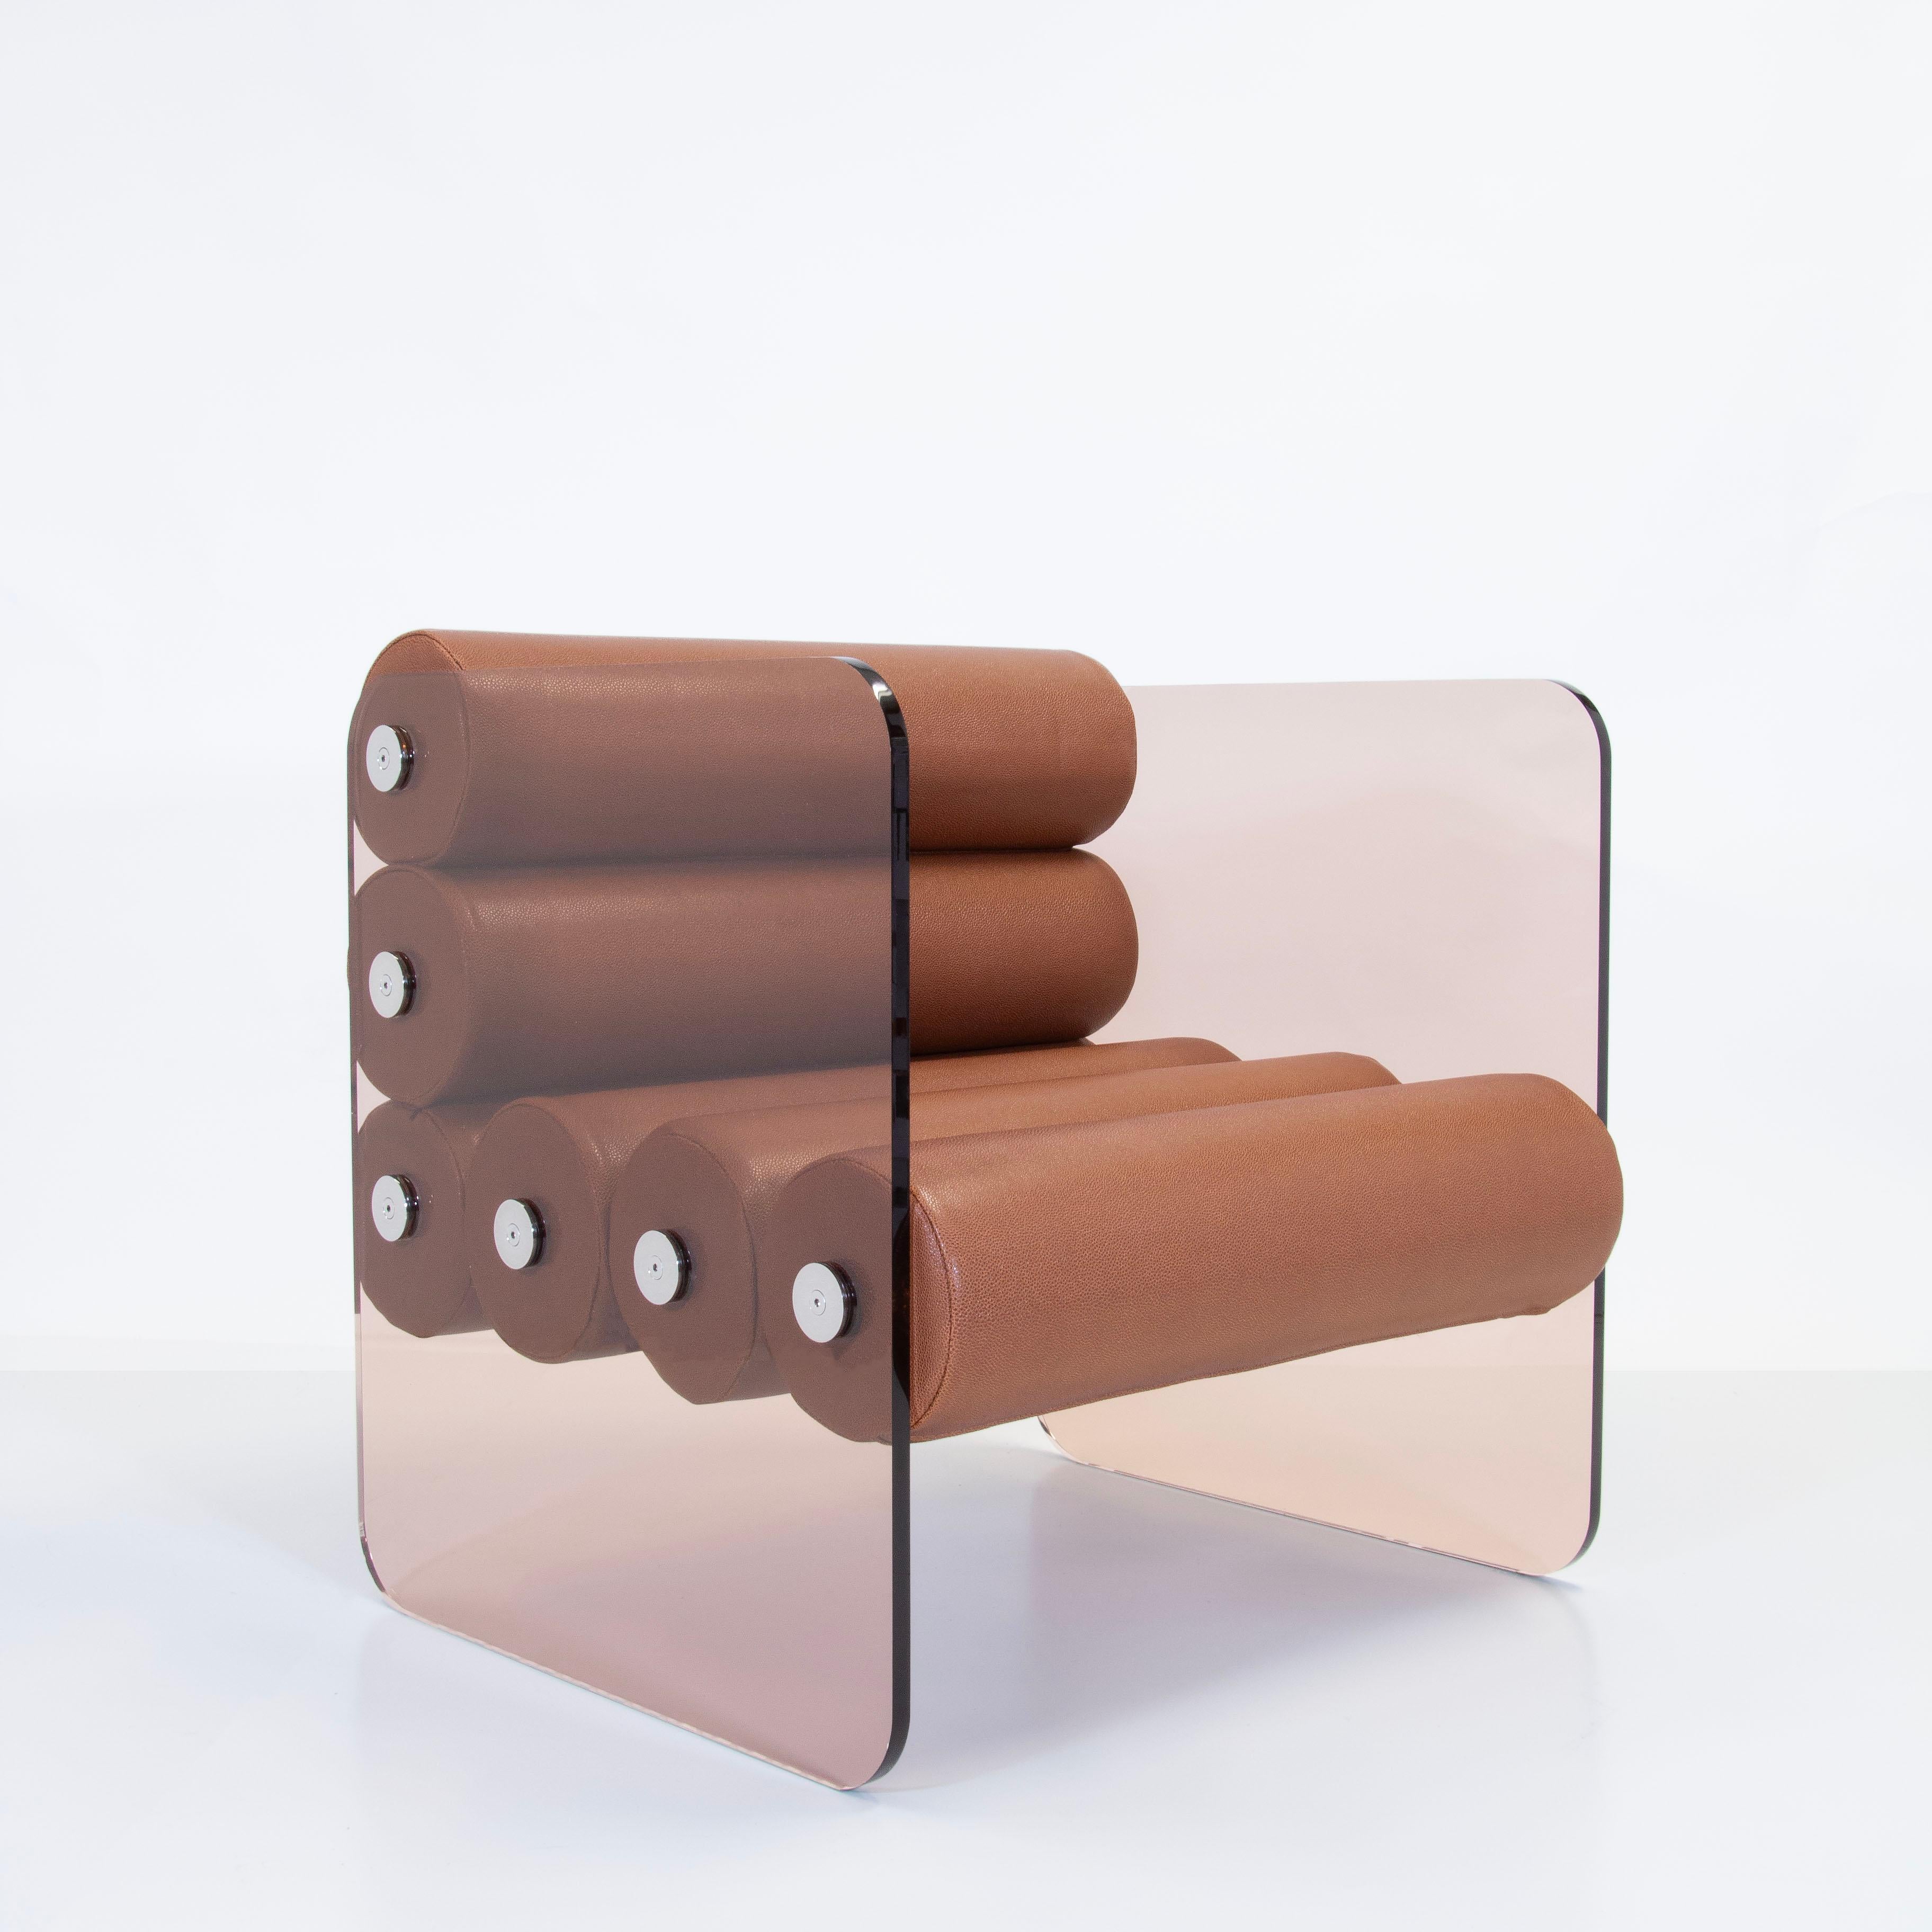 Stainless Steel Design armchair Mw01 bronze, made in France, designed by Olivier Santini For Sale